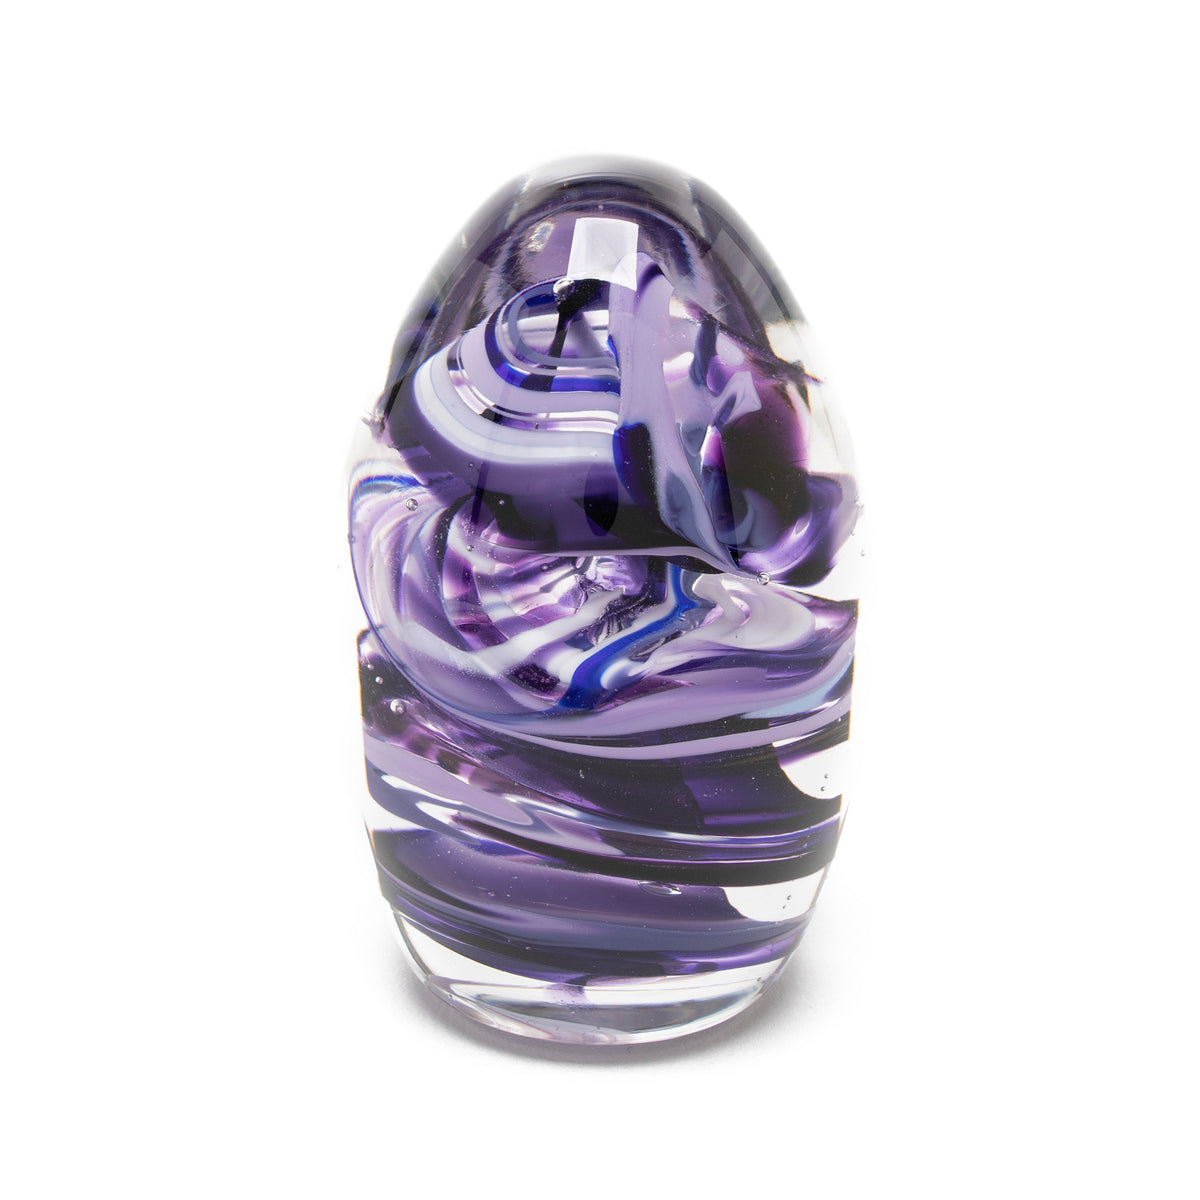 Egg Paperweight - Purple